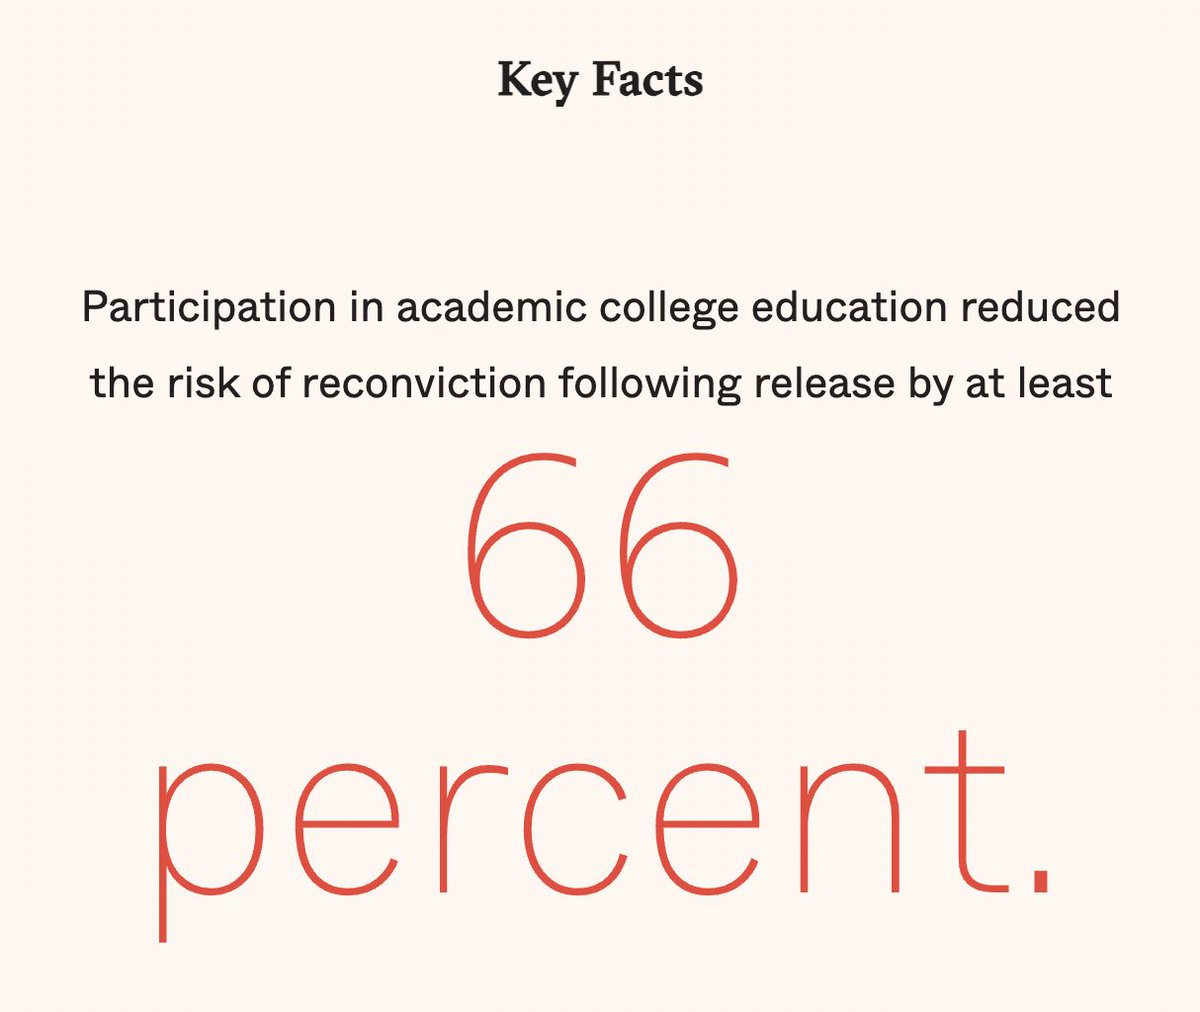 We should be doing more of what works and less of what doesn't. RETWEET if this matters to you. College-in-prison programs reduce the risk of reconviction by two-thirds, while securing for students the numerous advantages inherent to education. -- @verainstitute